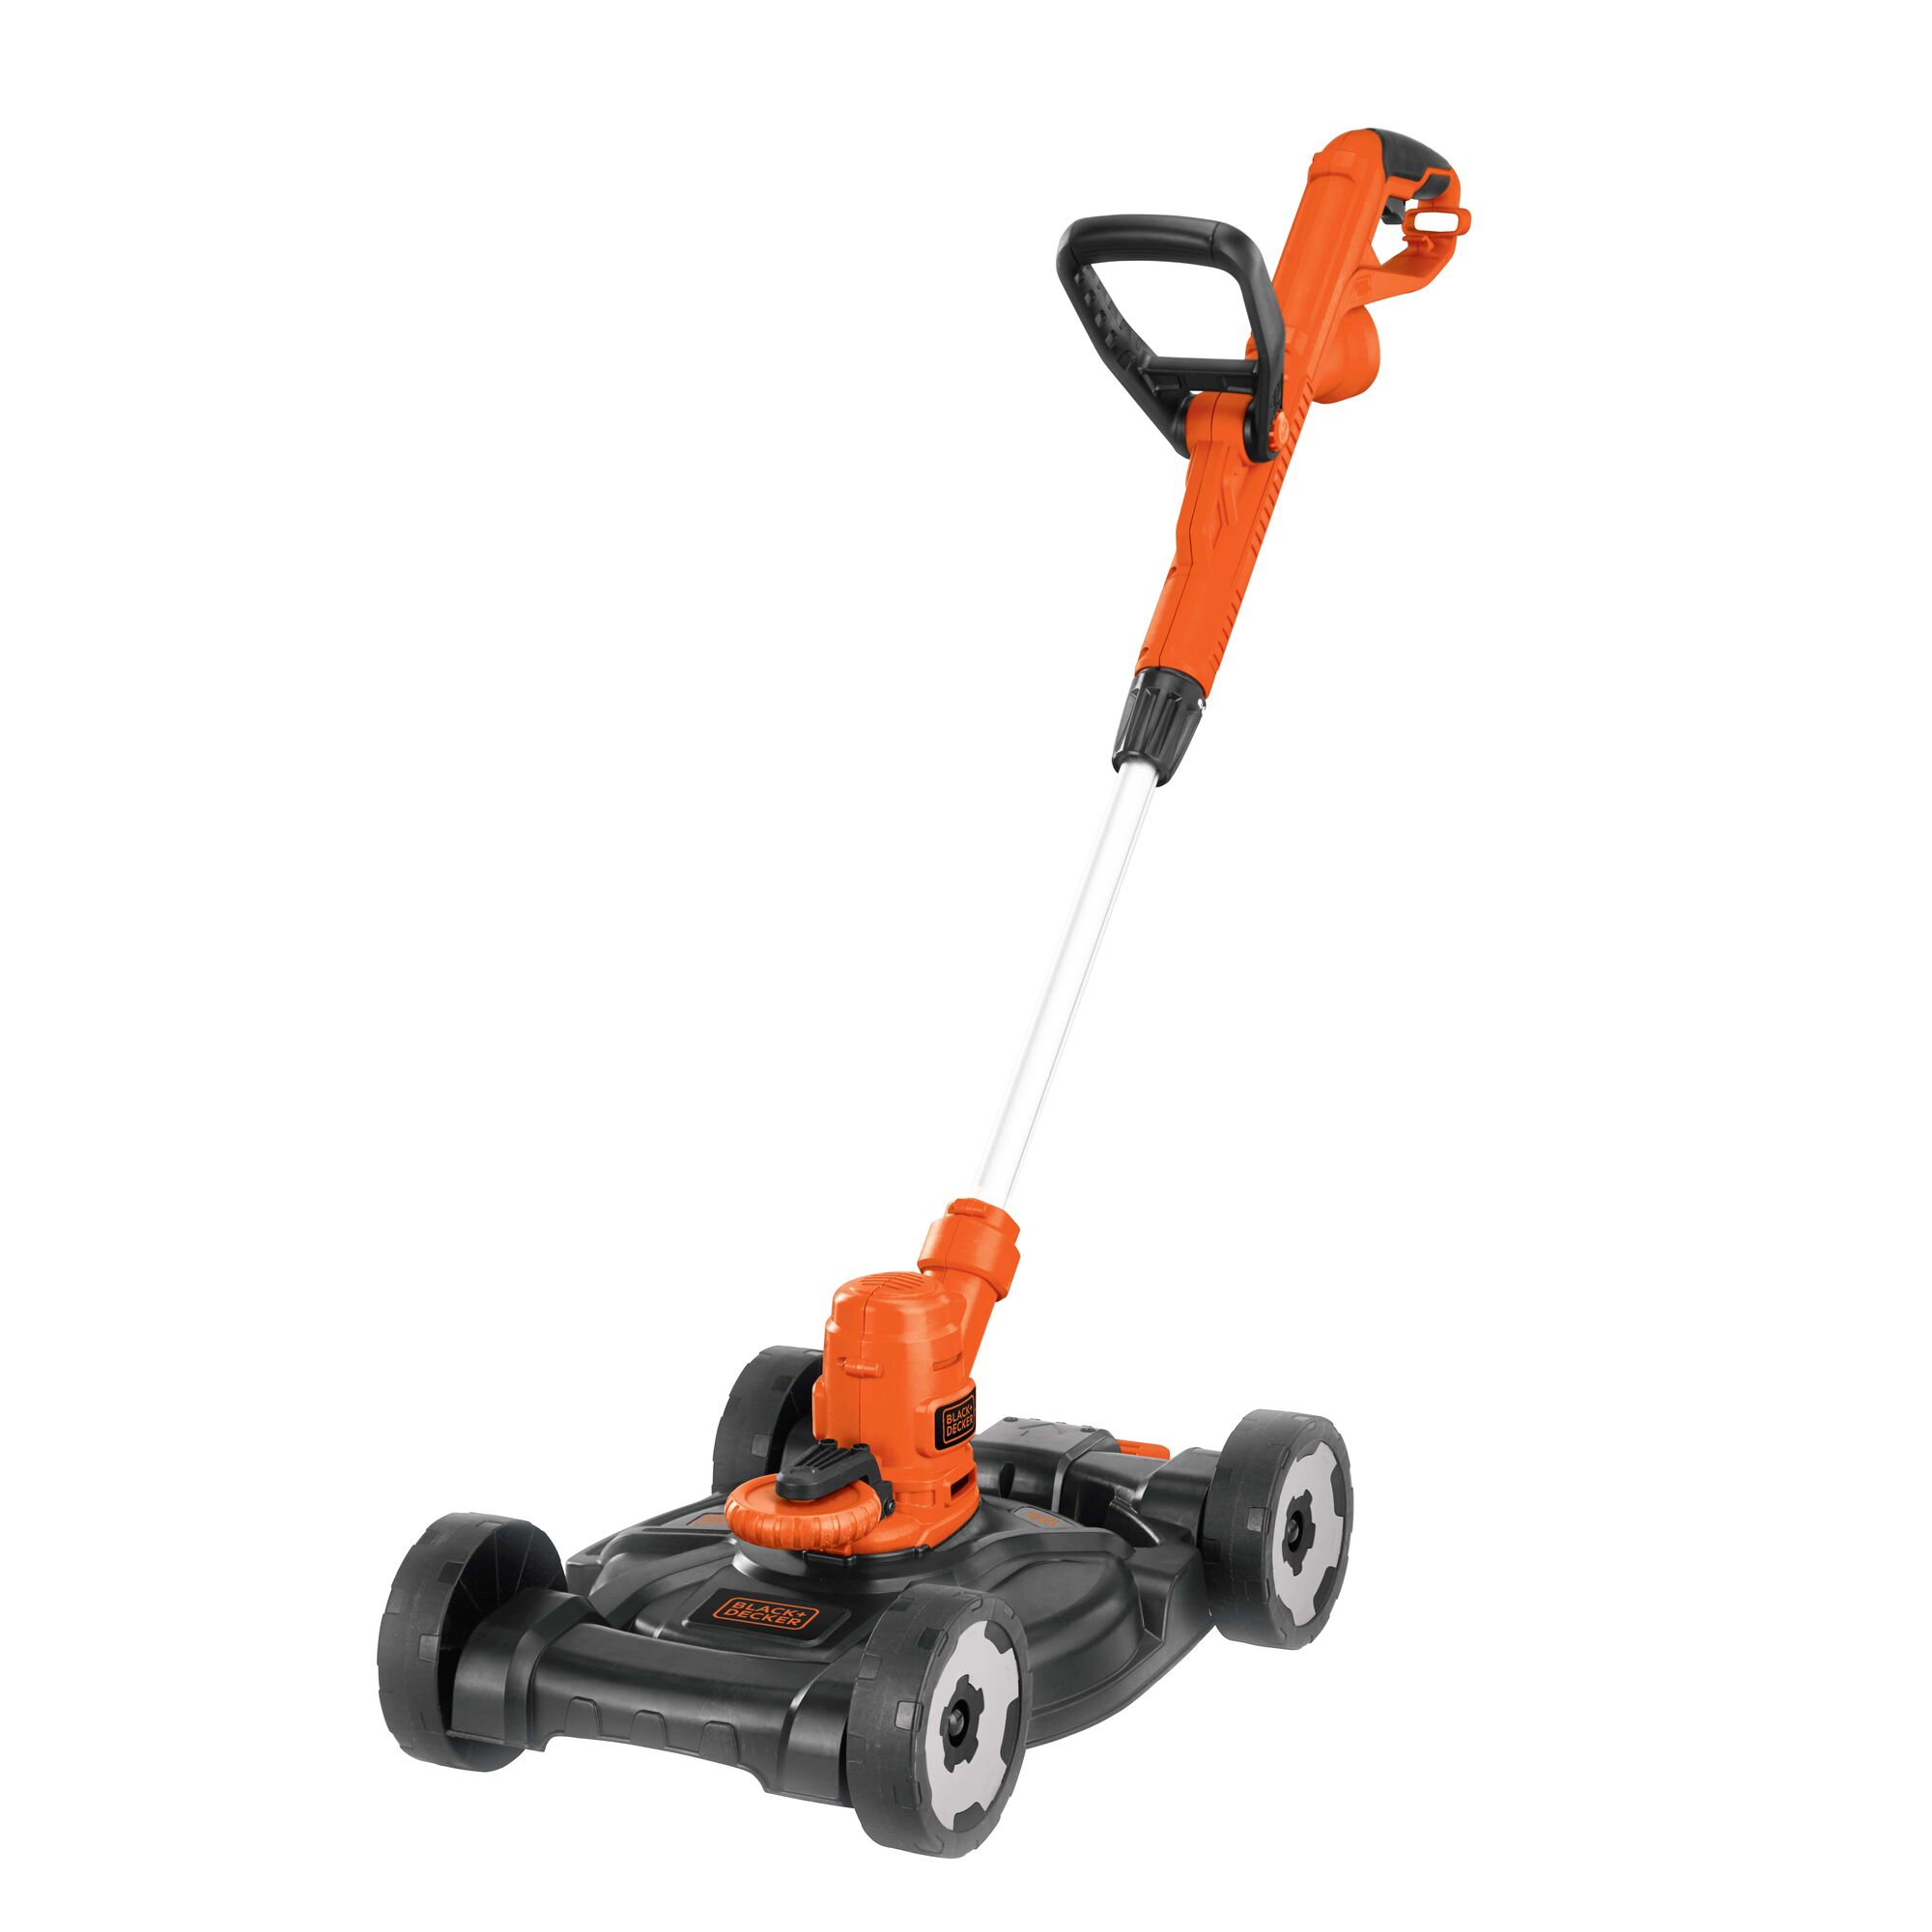 3-In-1 String Trimmer/Edger & Lawn Mower on white background.